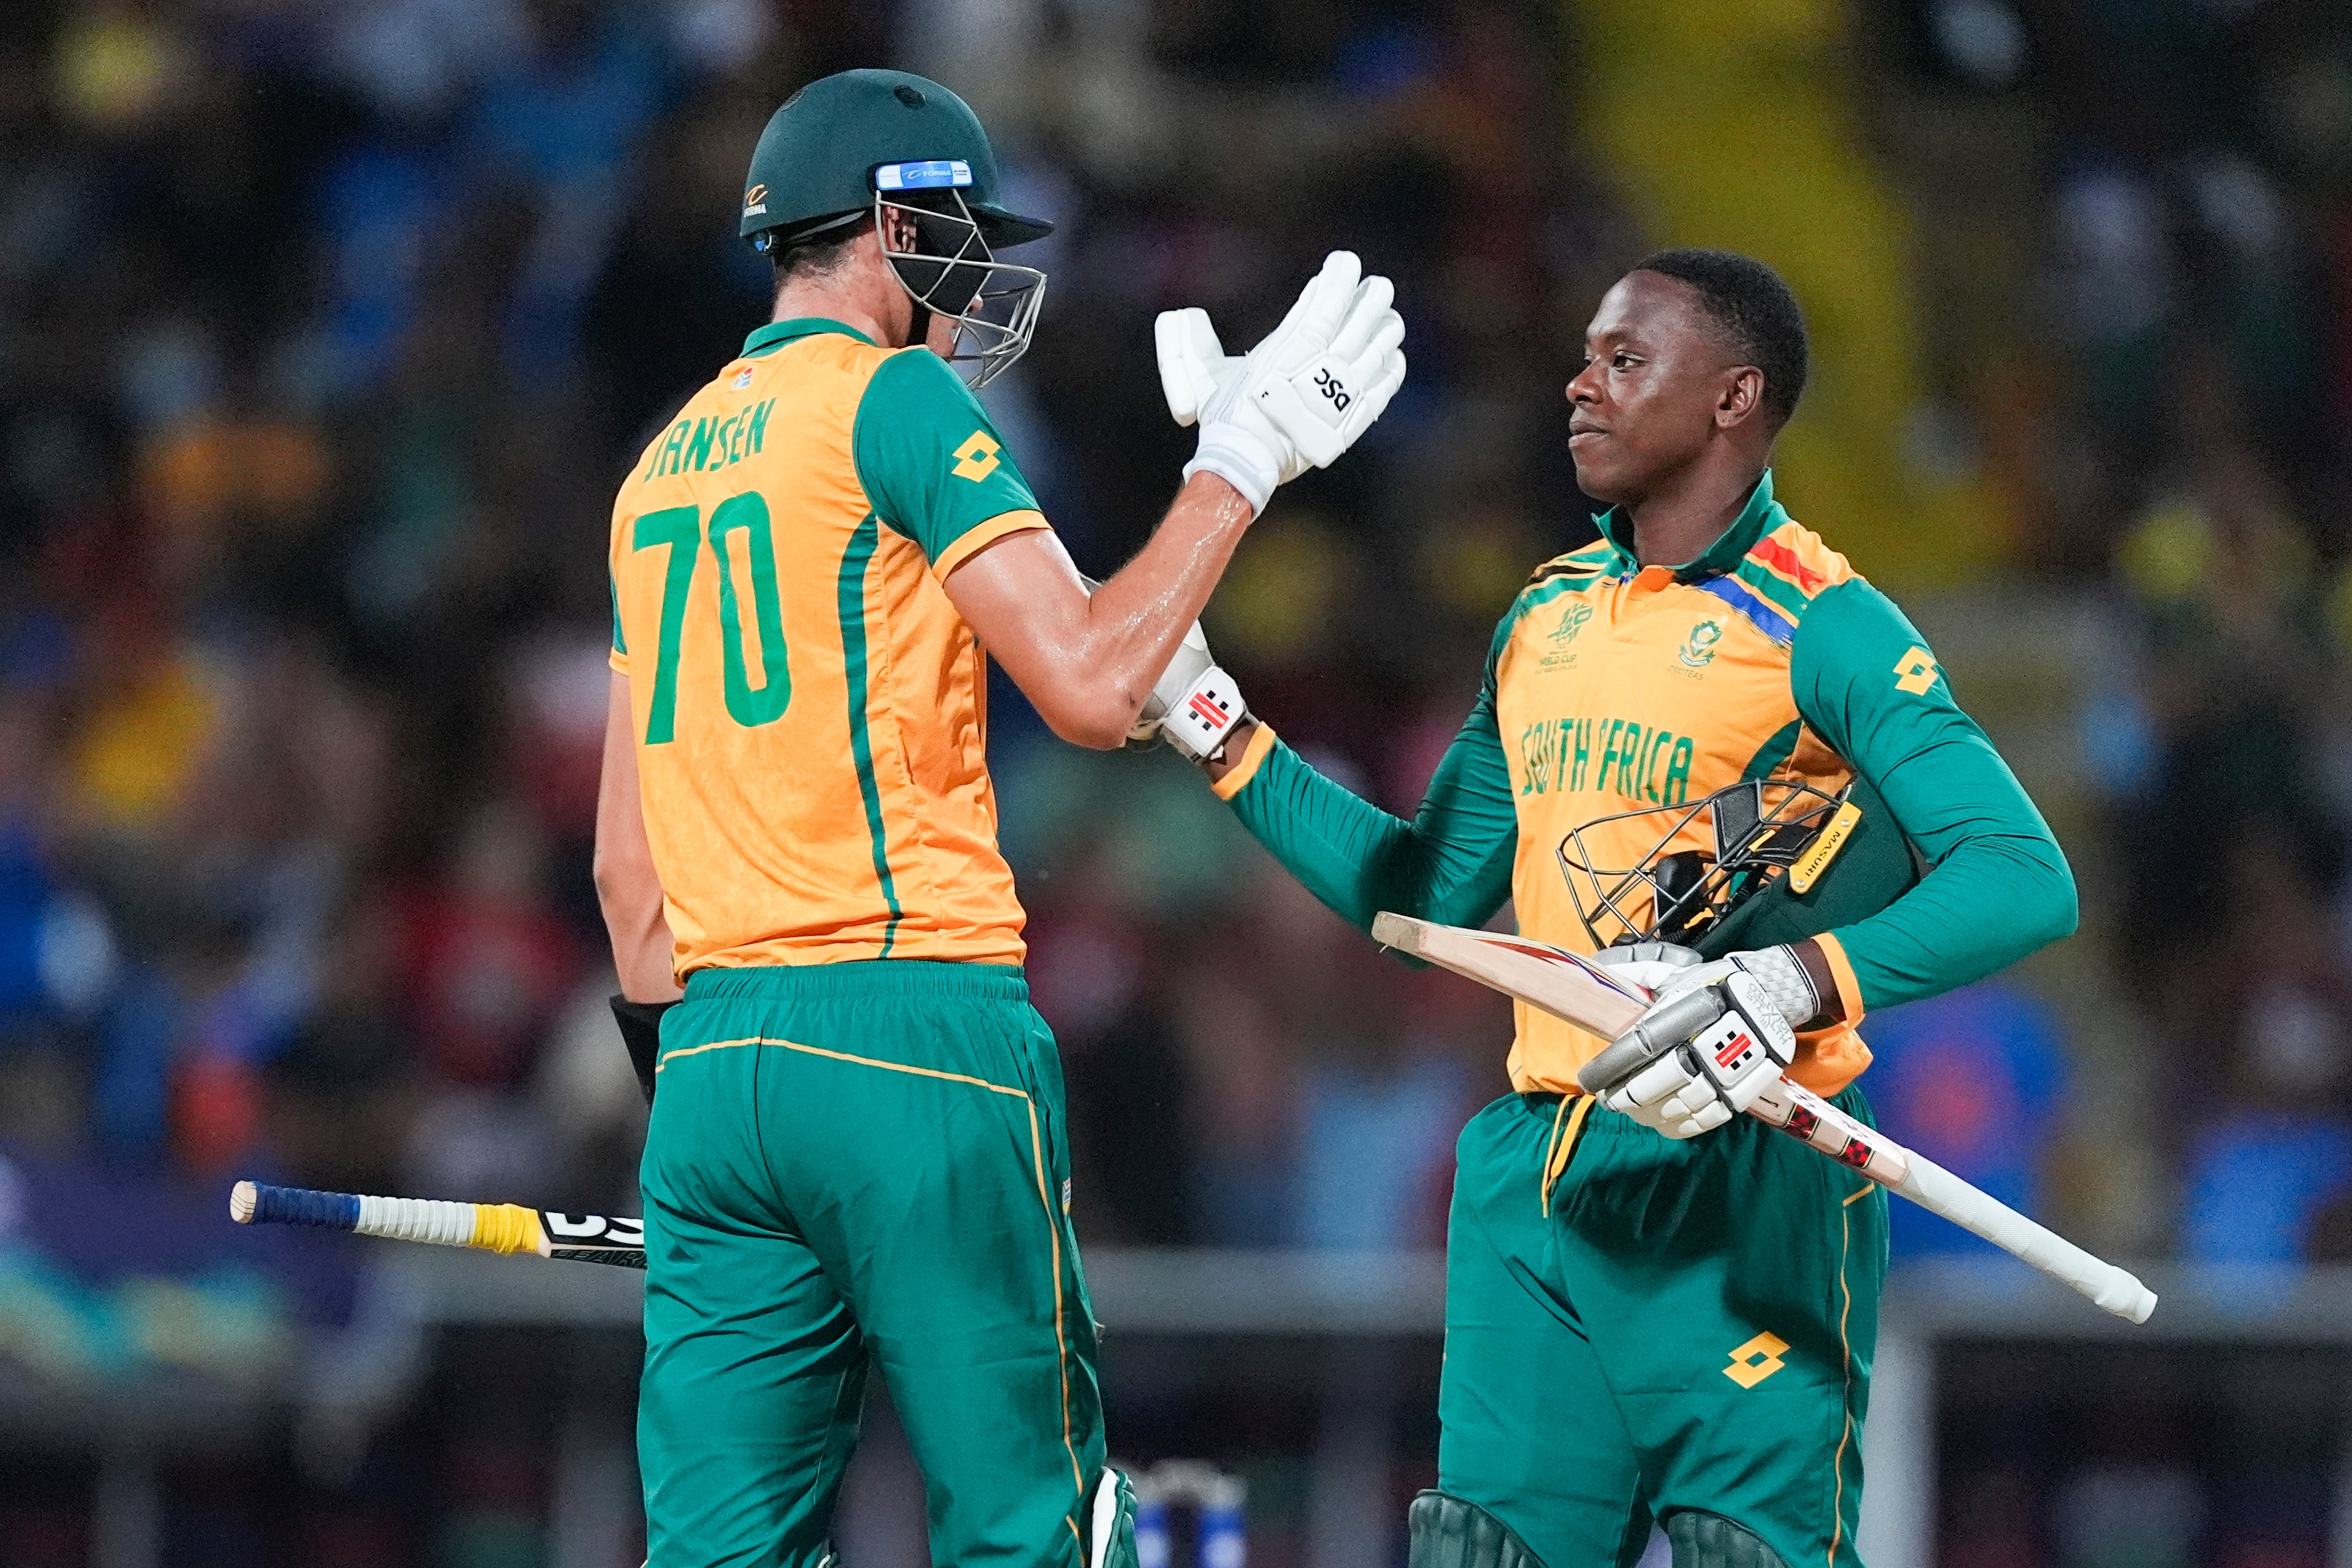 South Africa take on India in the T20 World Cup final